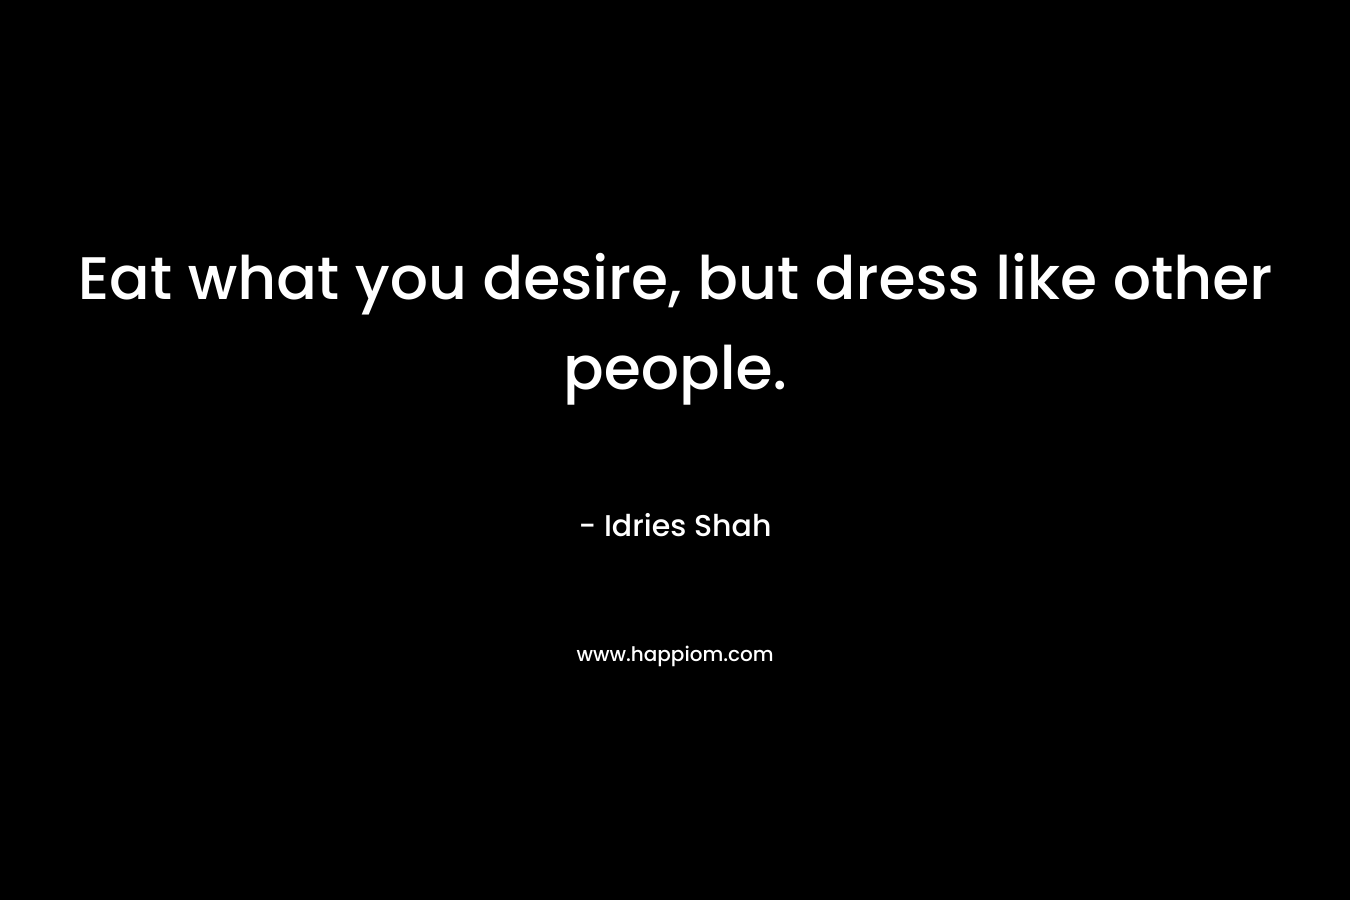 Eat what you desire, but dress like other people. – Idries Shah